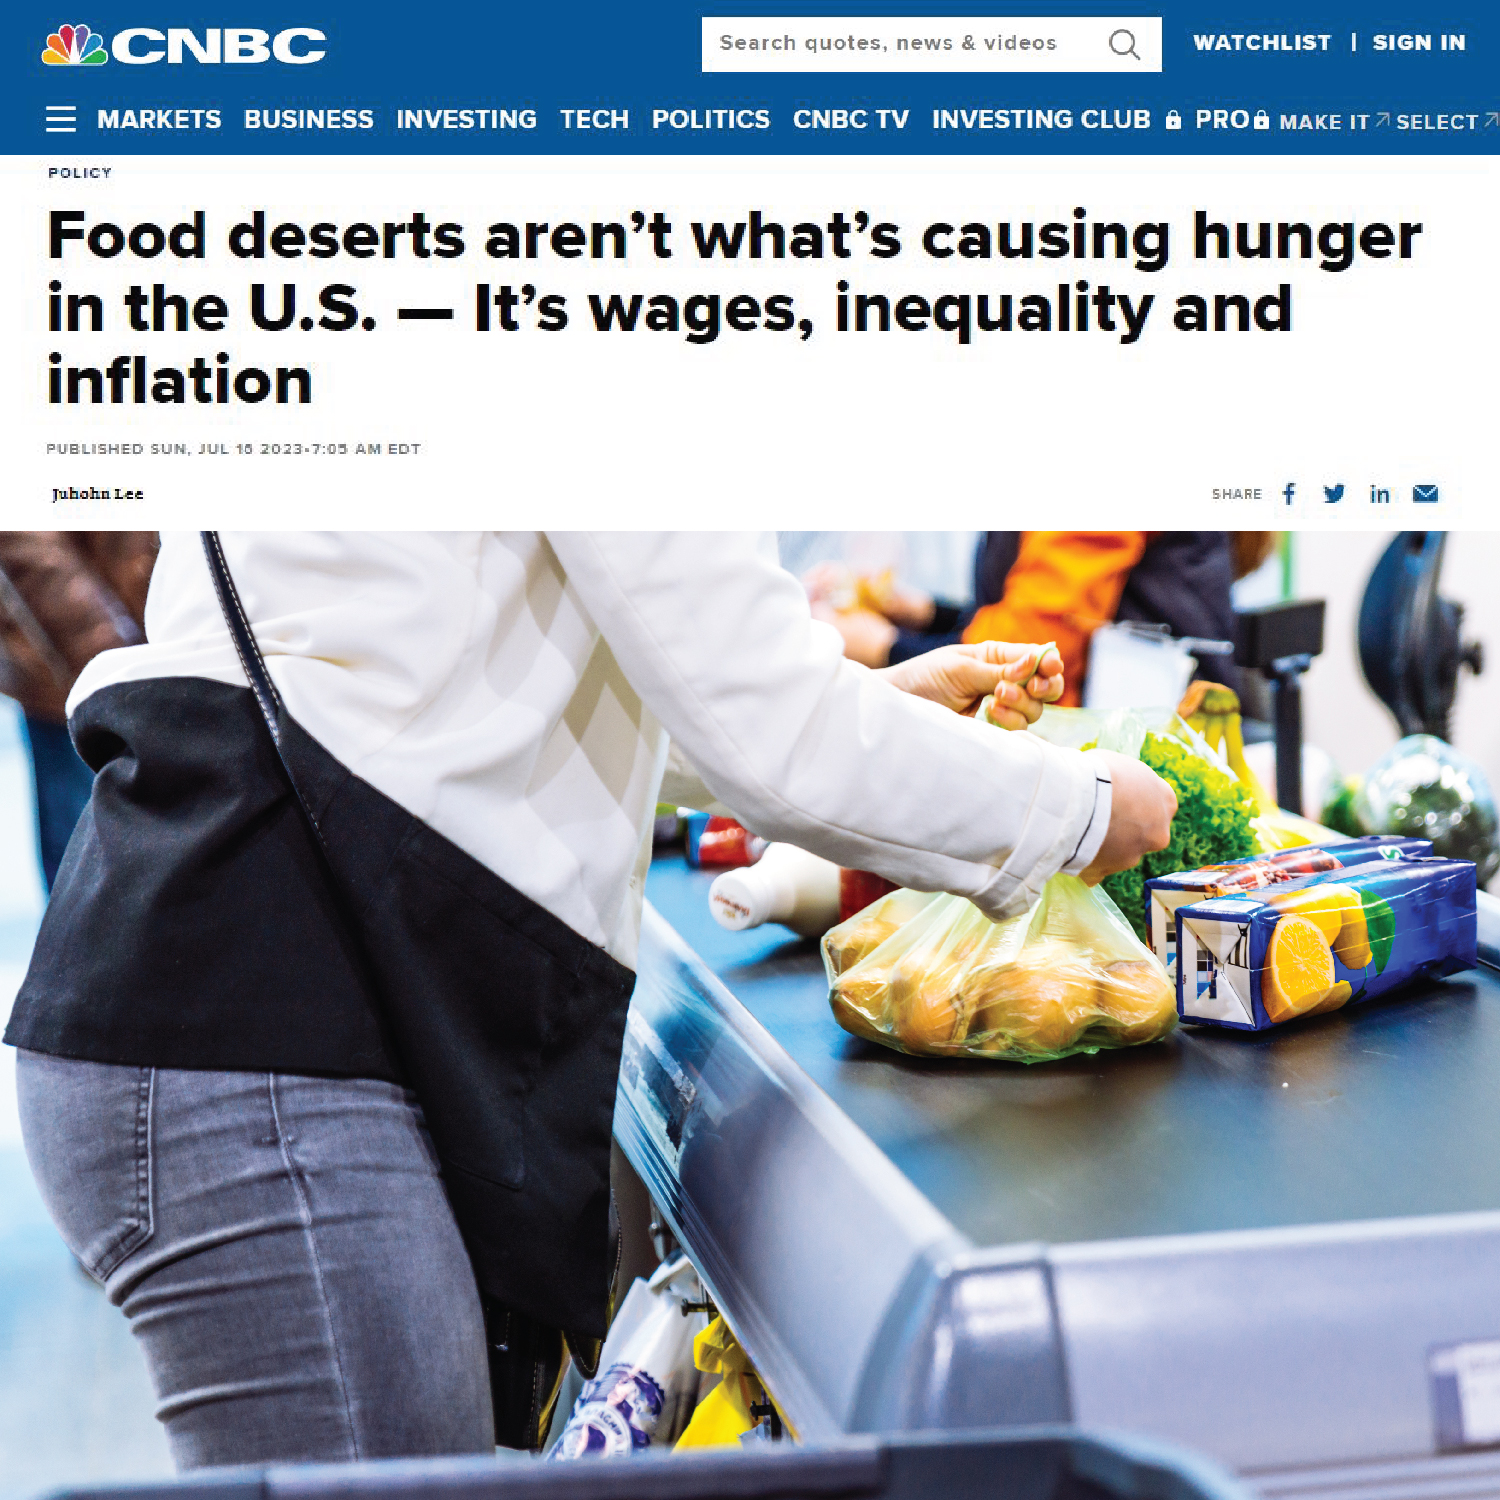 CNBC: Wages, Inflation Causing Food Insecurity in U.S. | St. Louis Area ...